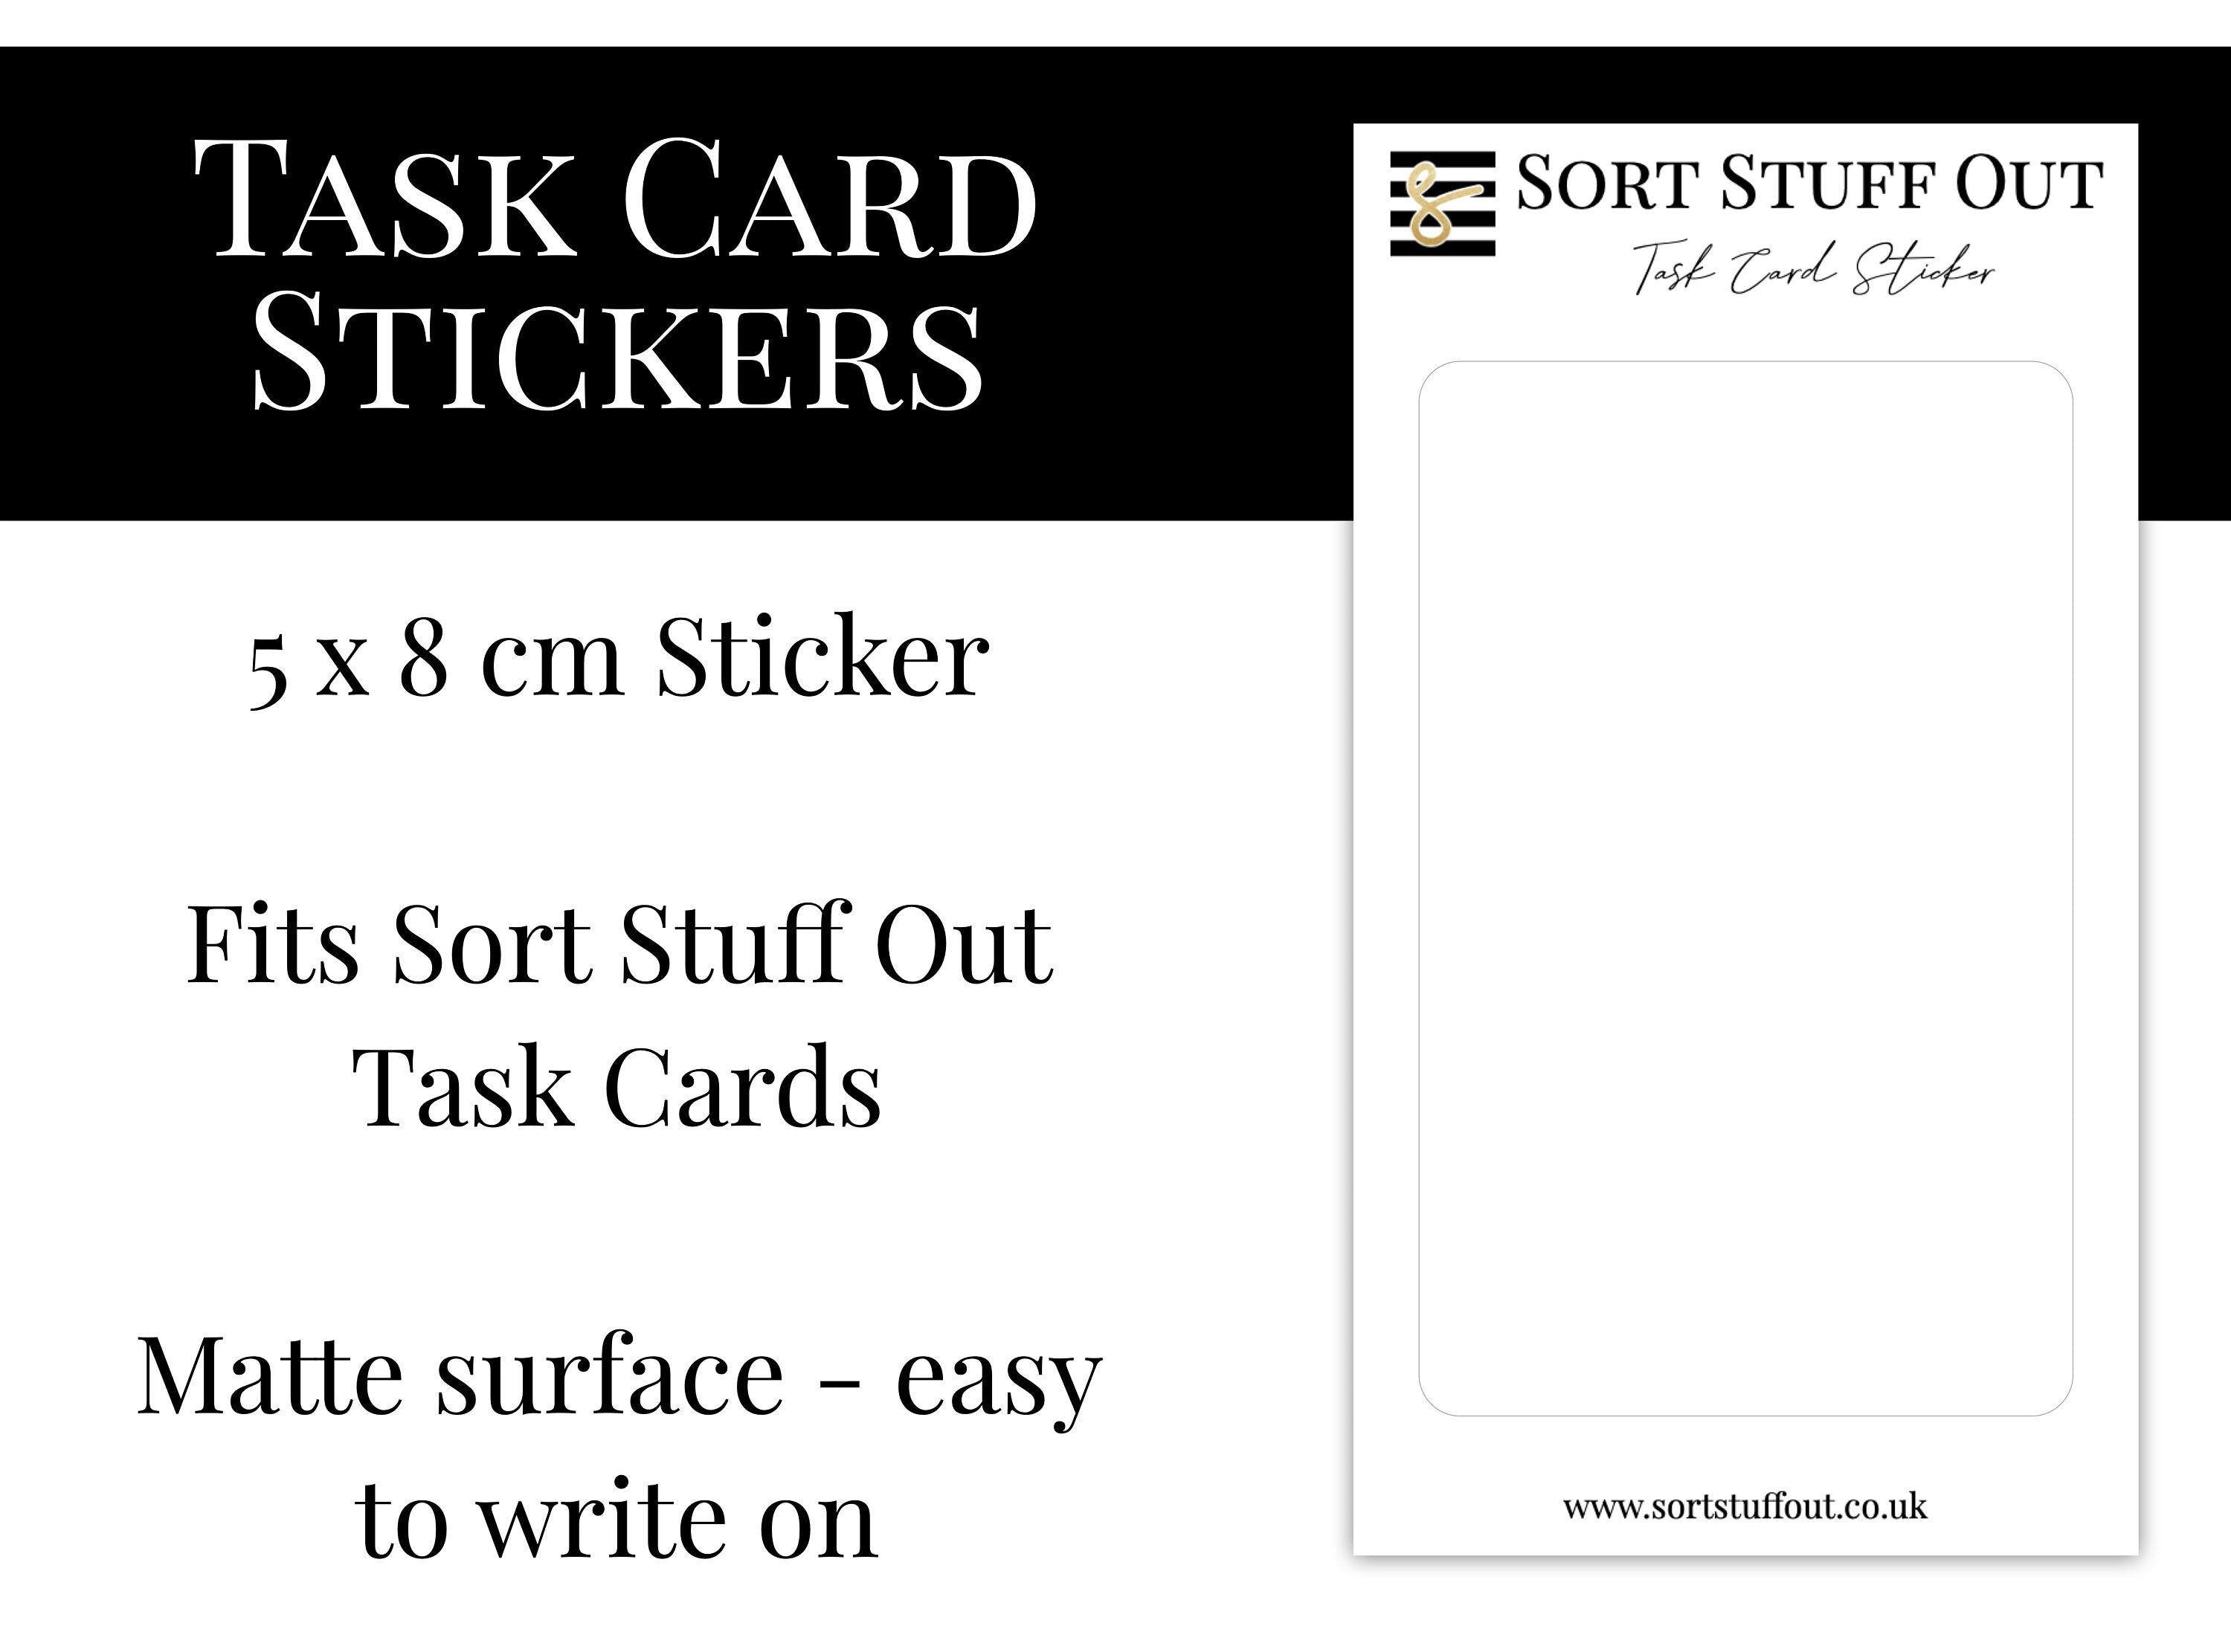 Task Card Sticker - Blank Single Sticker for Credit Card Size Cards